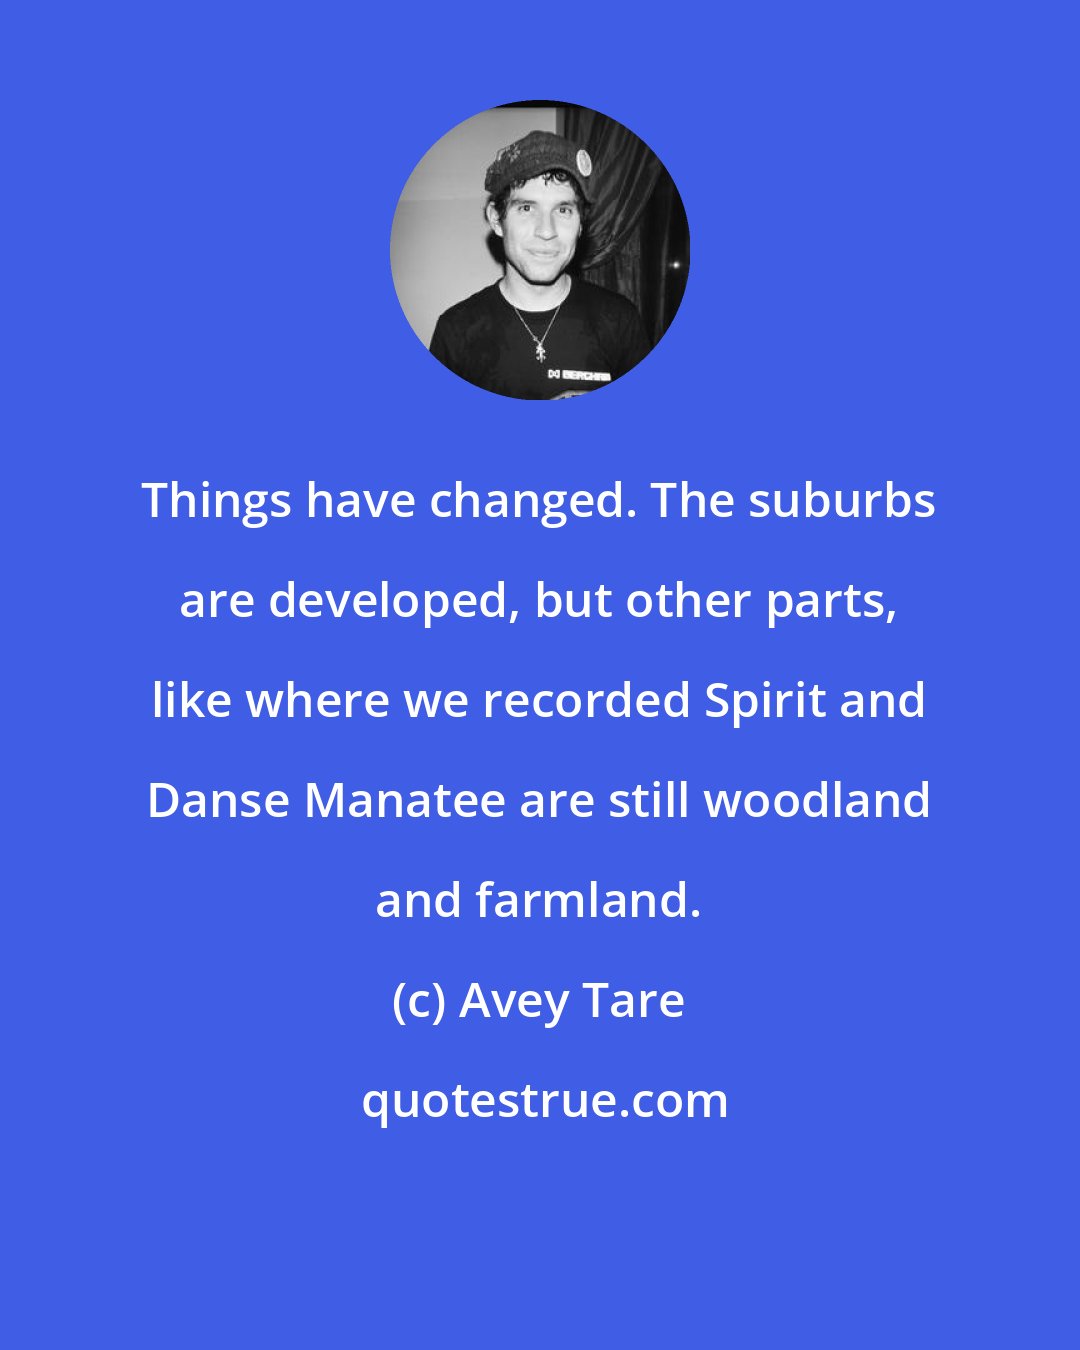 Avey Tare: Things have changed. The suburbs are developed, but other parts, like where we recorded Spirit and Danse Manatee are still woodland and farmland.